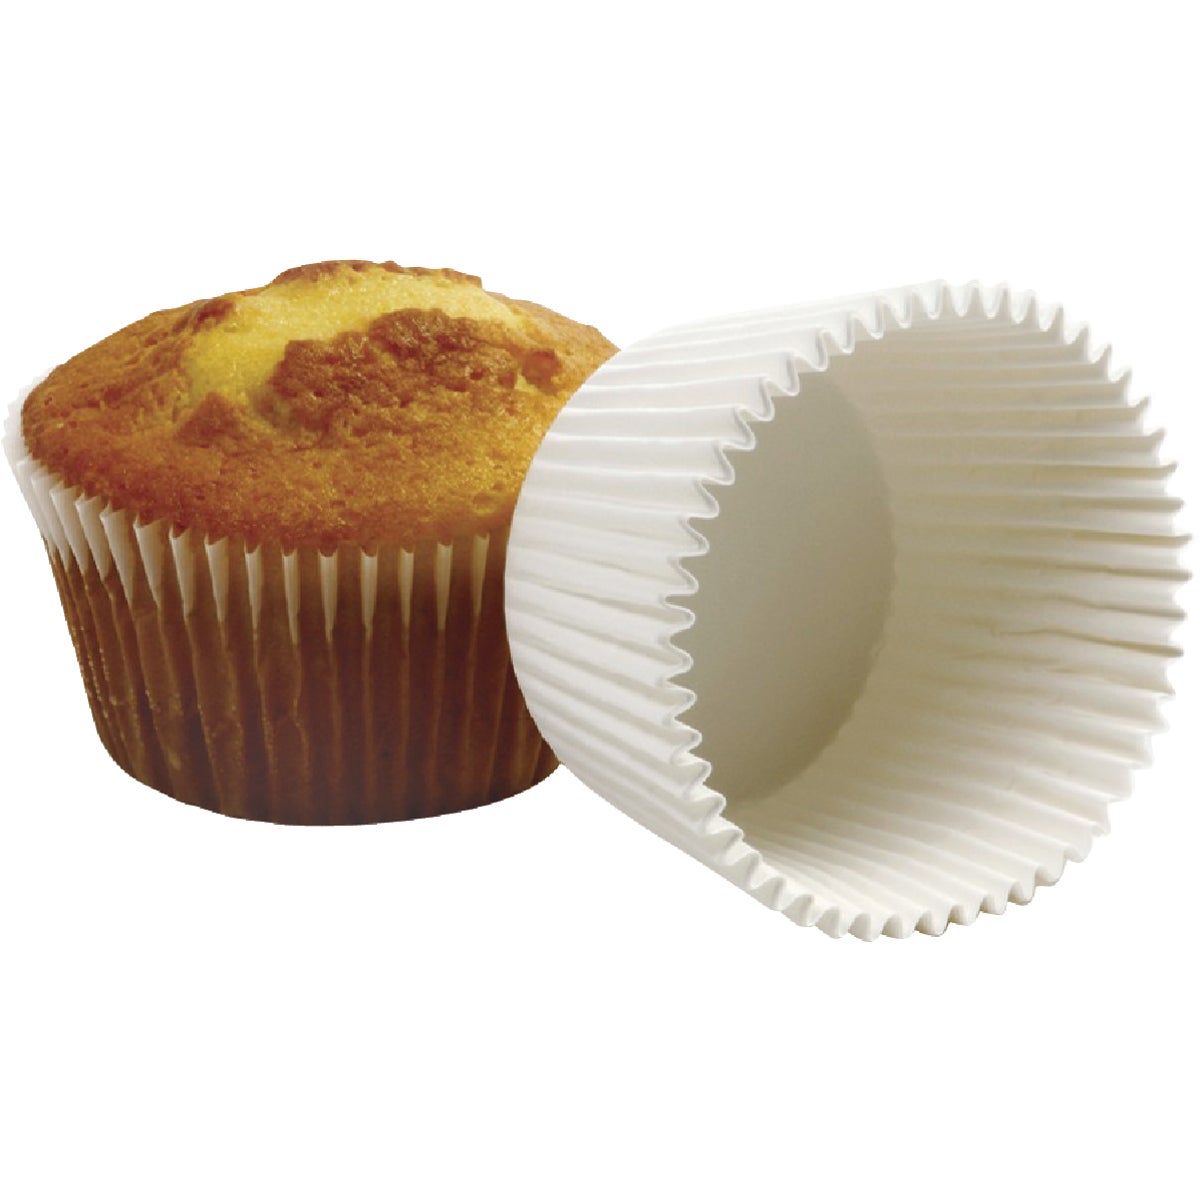 Baking Cups